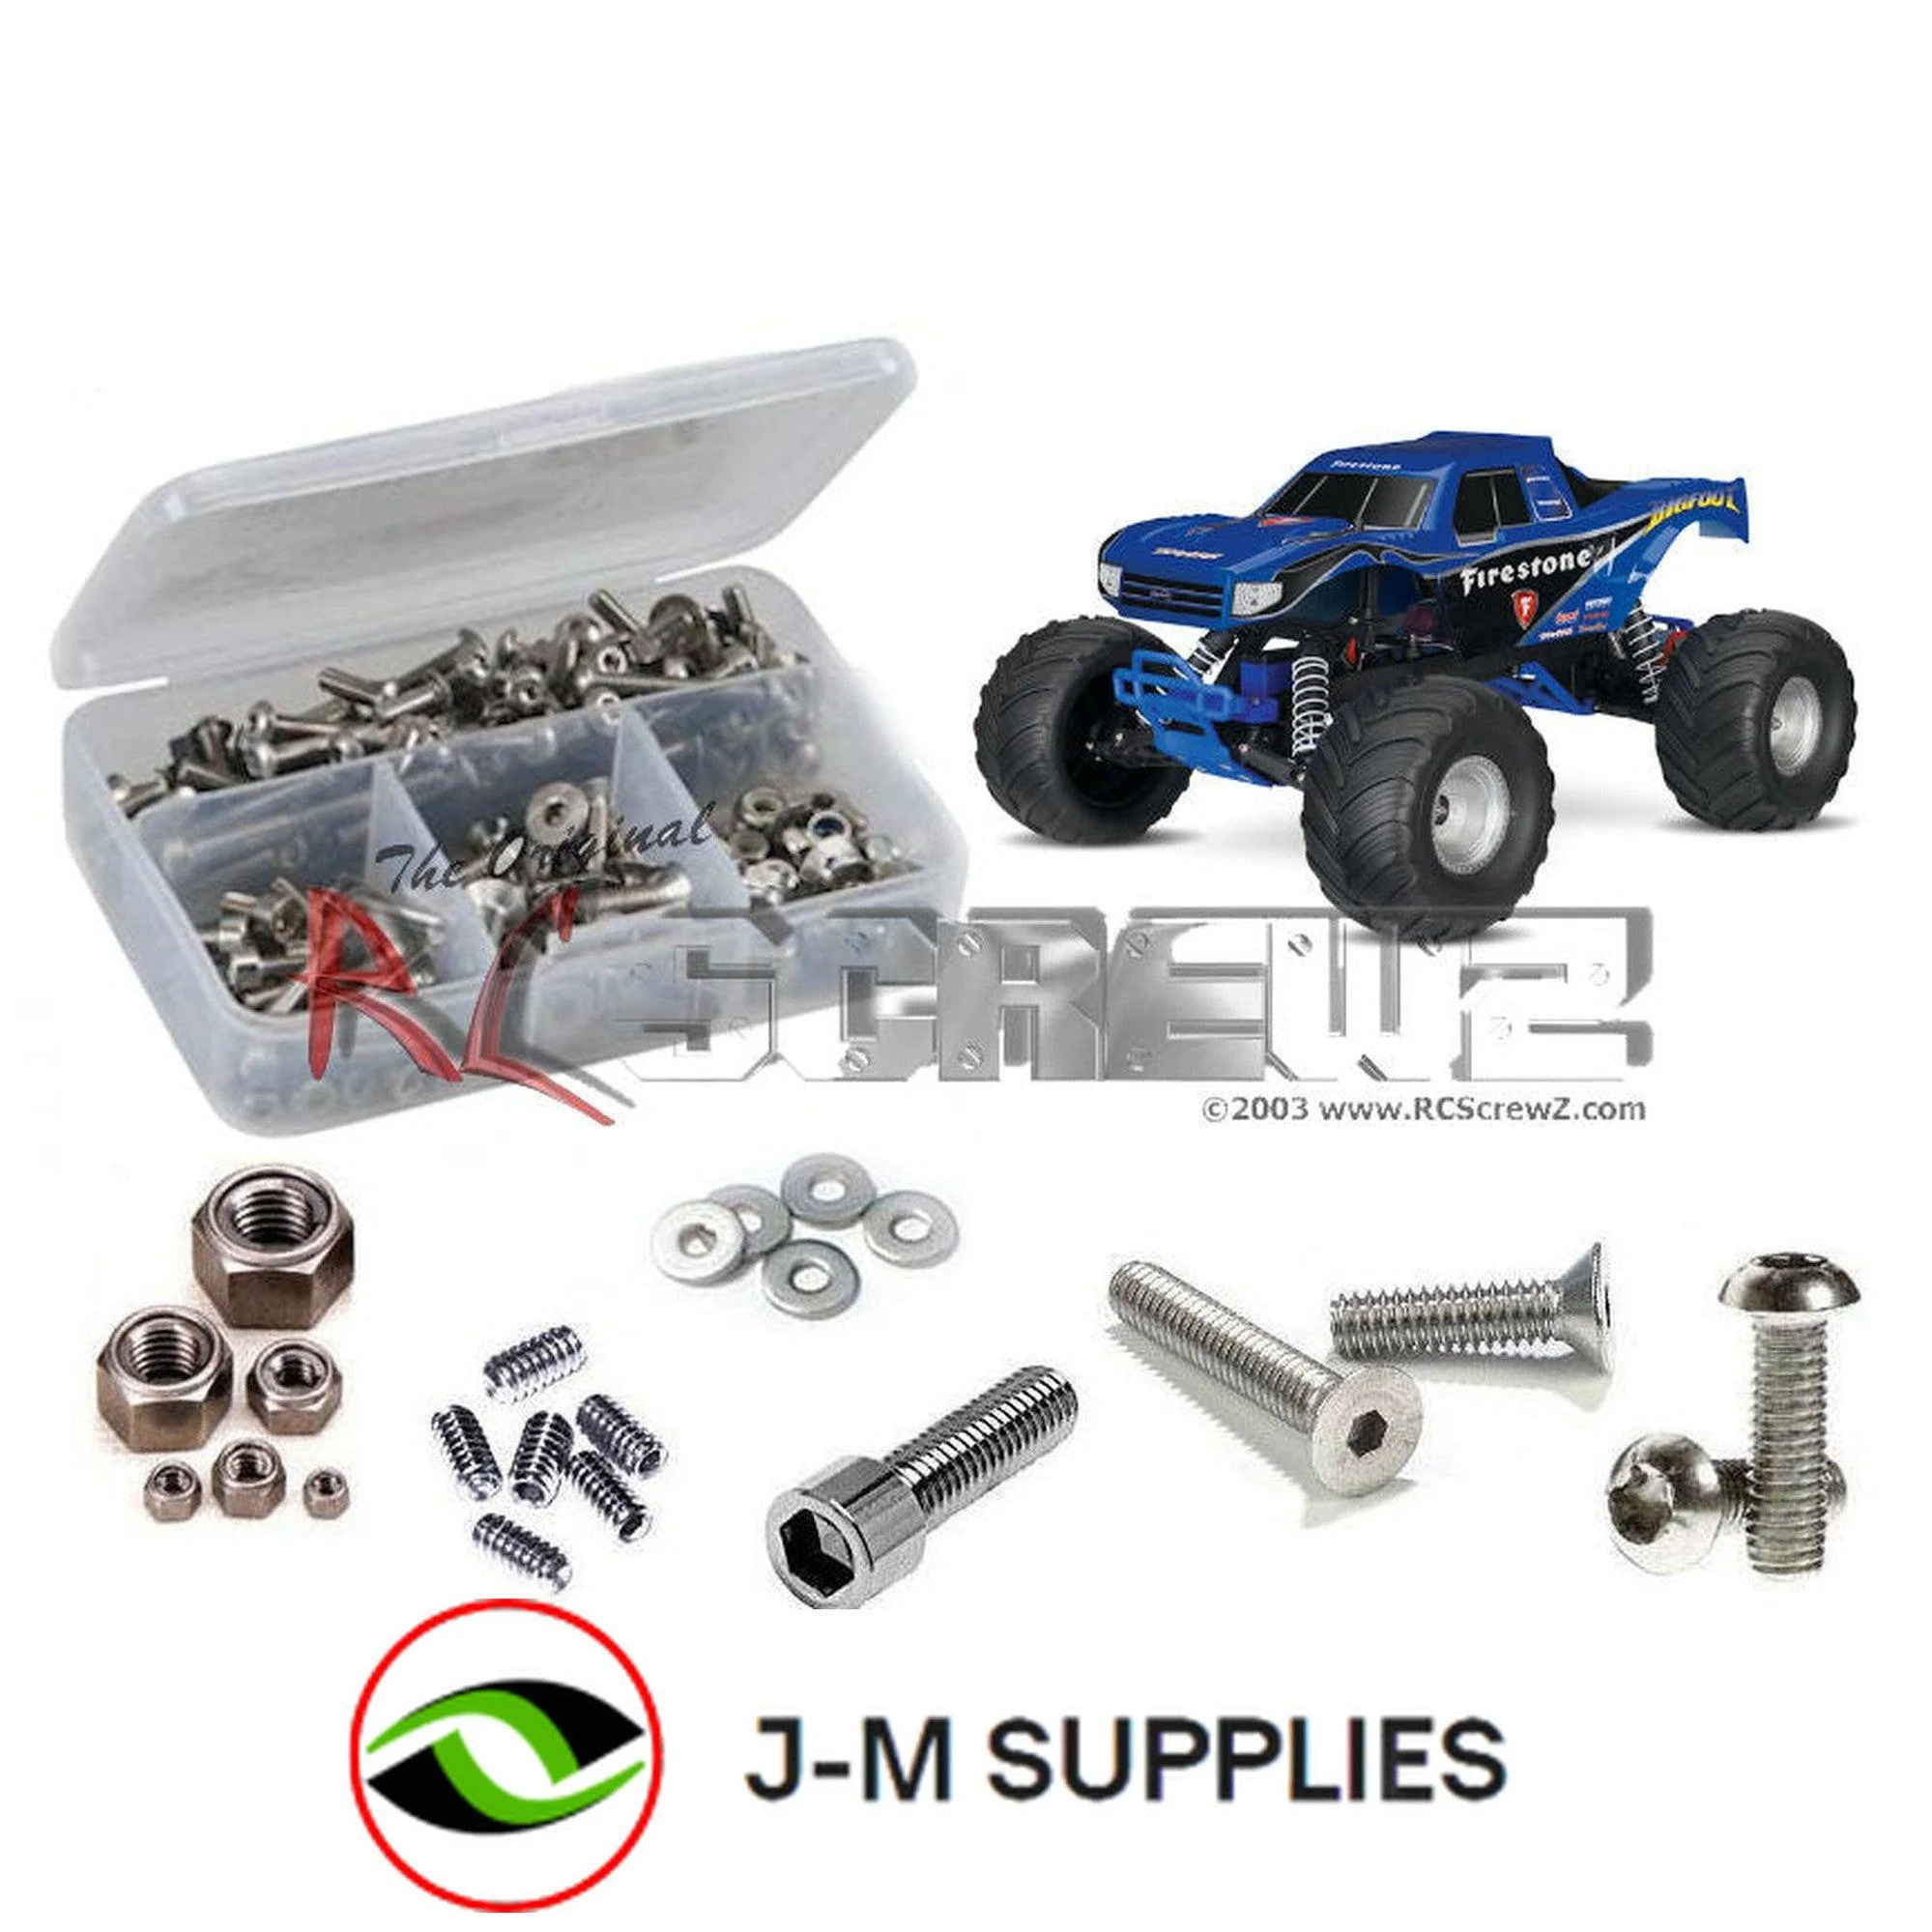 RCScrewZ Stainless Screw Kit tra077 for Traxxas Bigfoot 2wd 1/10th #36034/84-1 - Picture 1 of 12